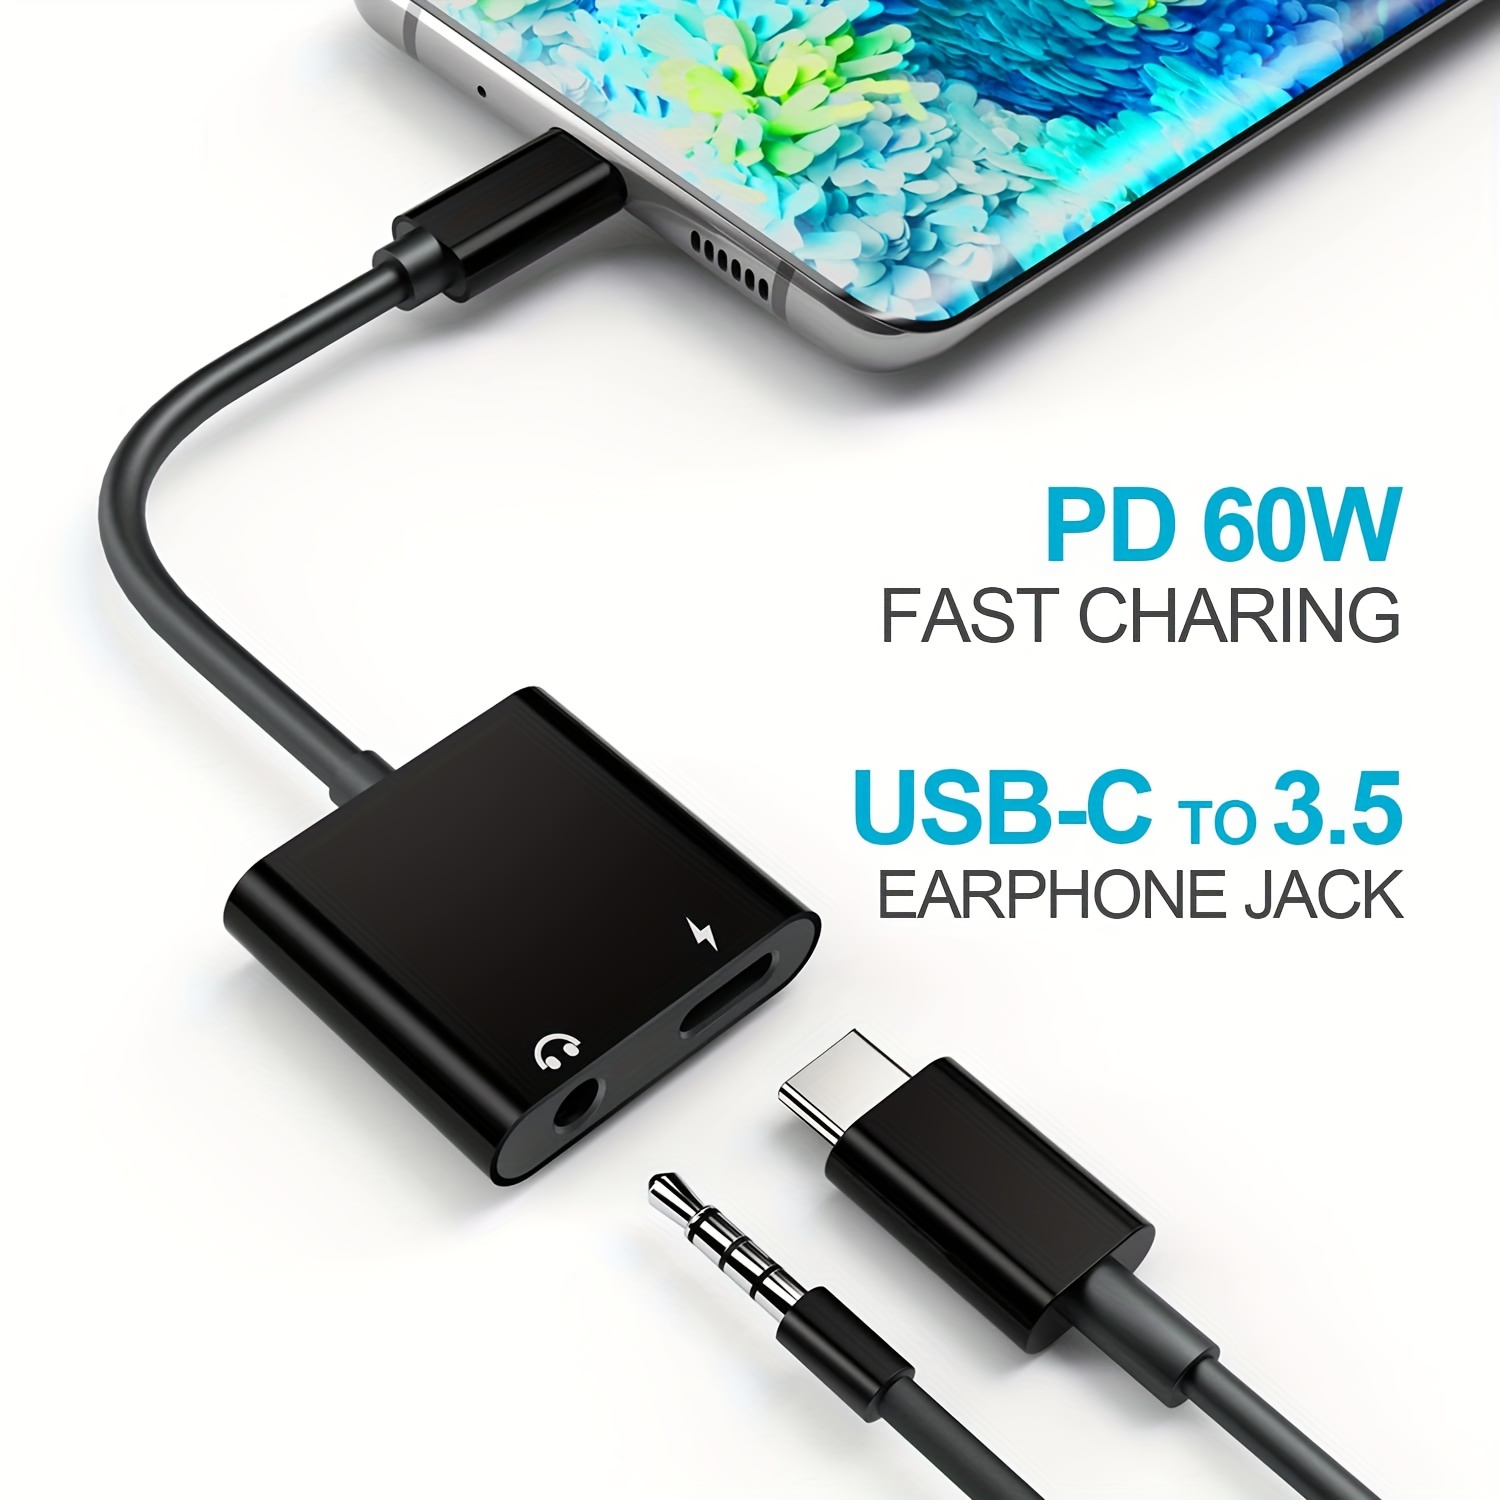 

2-in-1 Usb Type C To 3.5mm Audio Earphone Aux Splitter, Pd 60w Fast Charging, Compatible With Ipad Pro 2021 2020, Ipad Air4 Mini6 Samsung Note20 Galaxy S22/s21, Pixel 6/5/4/3